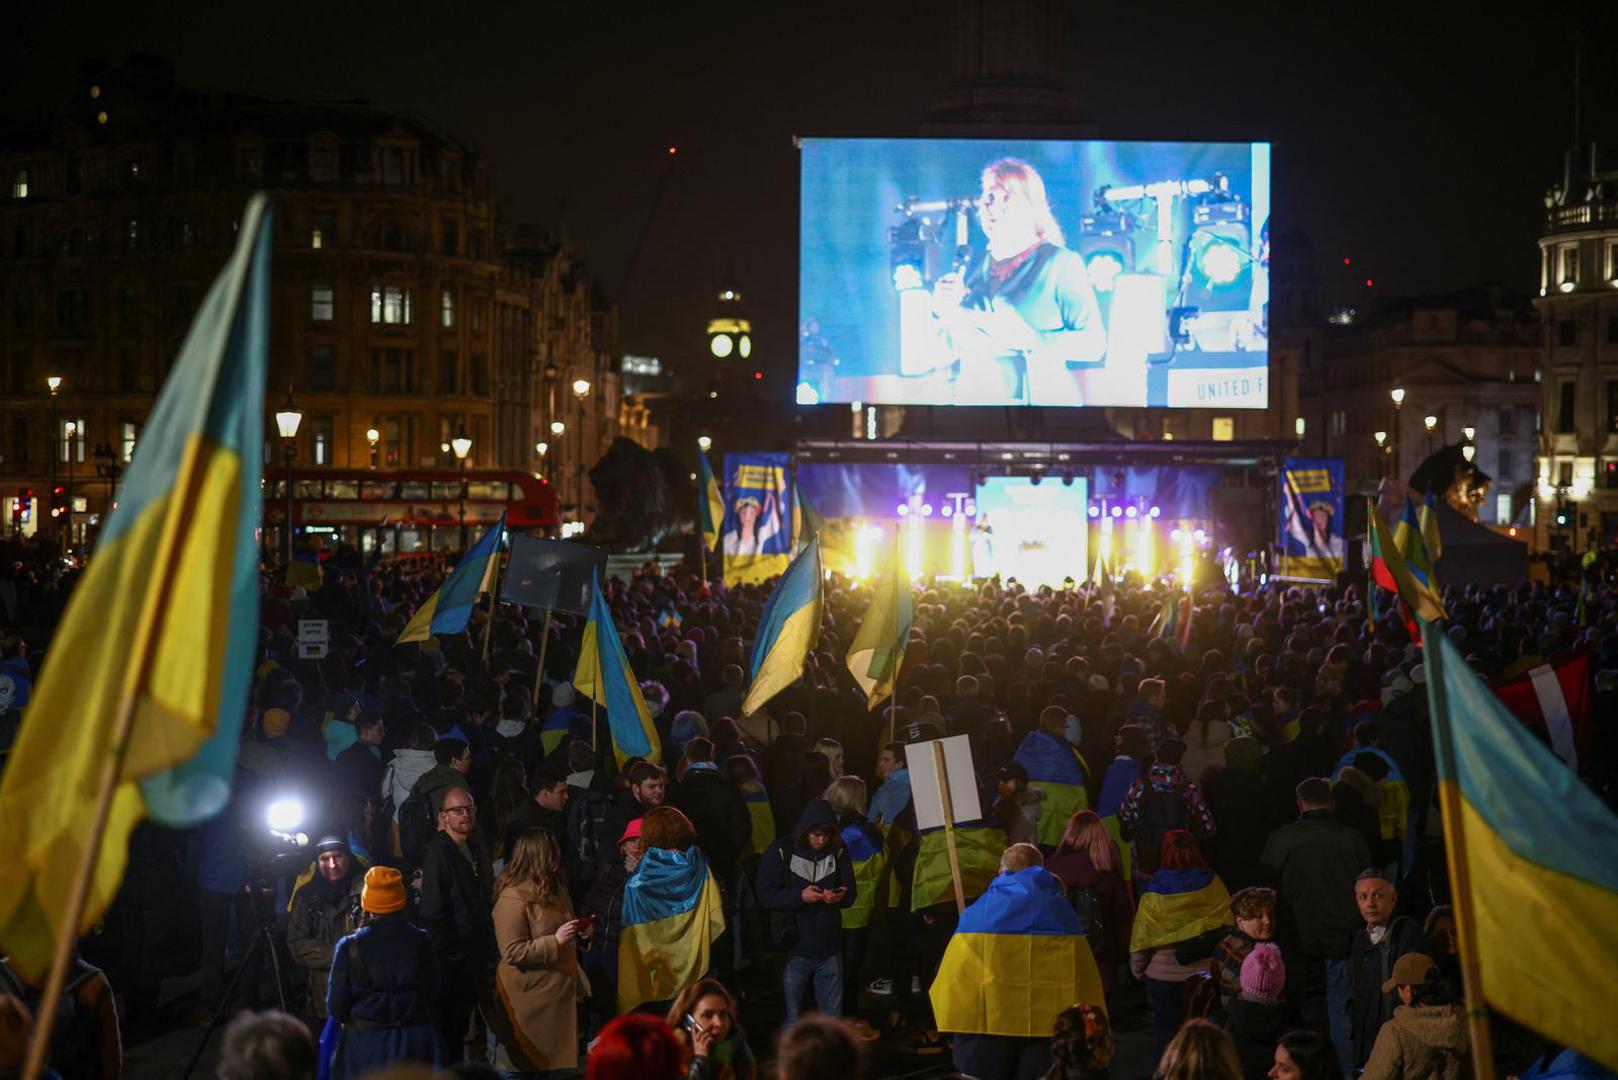 People attend a vigil for Ukraine held on the anniversary of the conflict with Russia, at Trafalgar Square in London, Britain February 23, 2023. REUTERS/Henry Nicholls Photo: Henry Nicholls/REUTERS